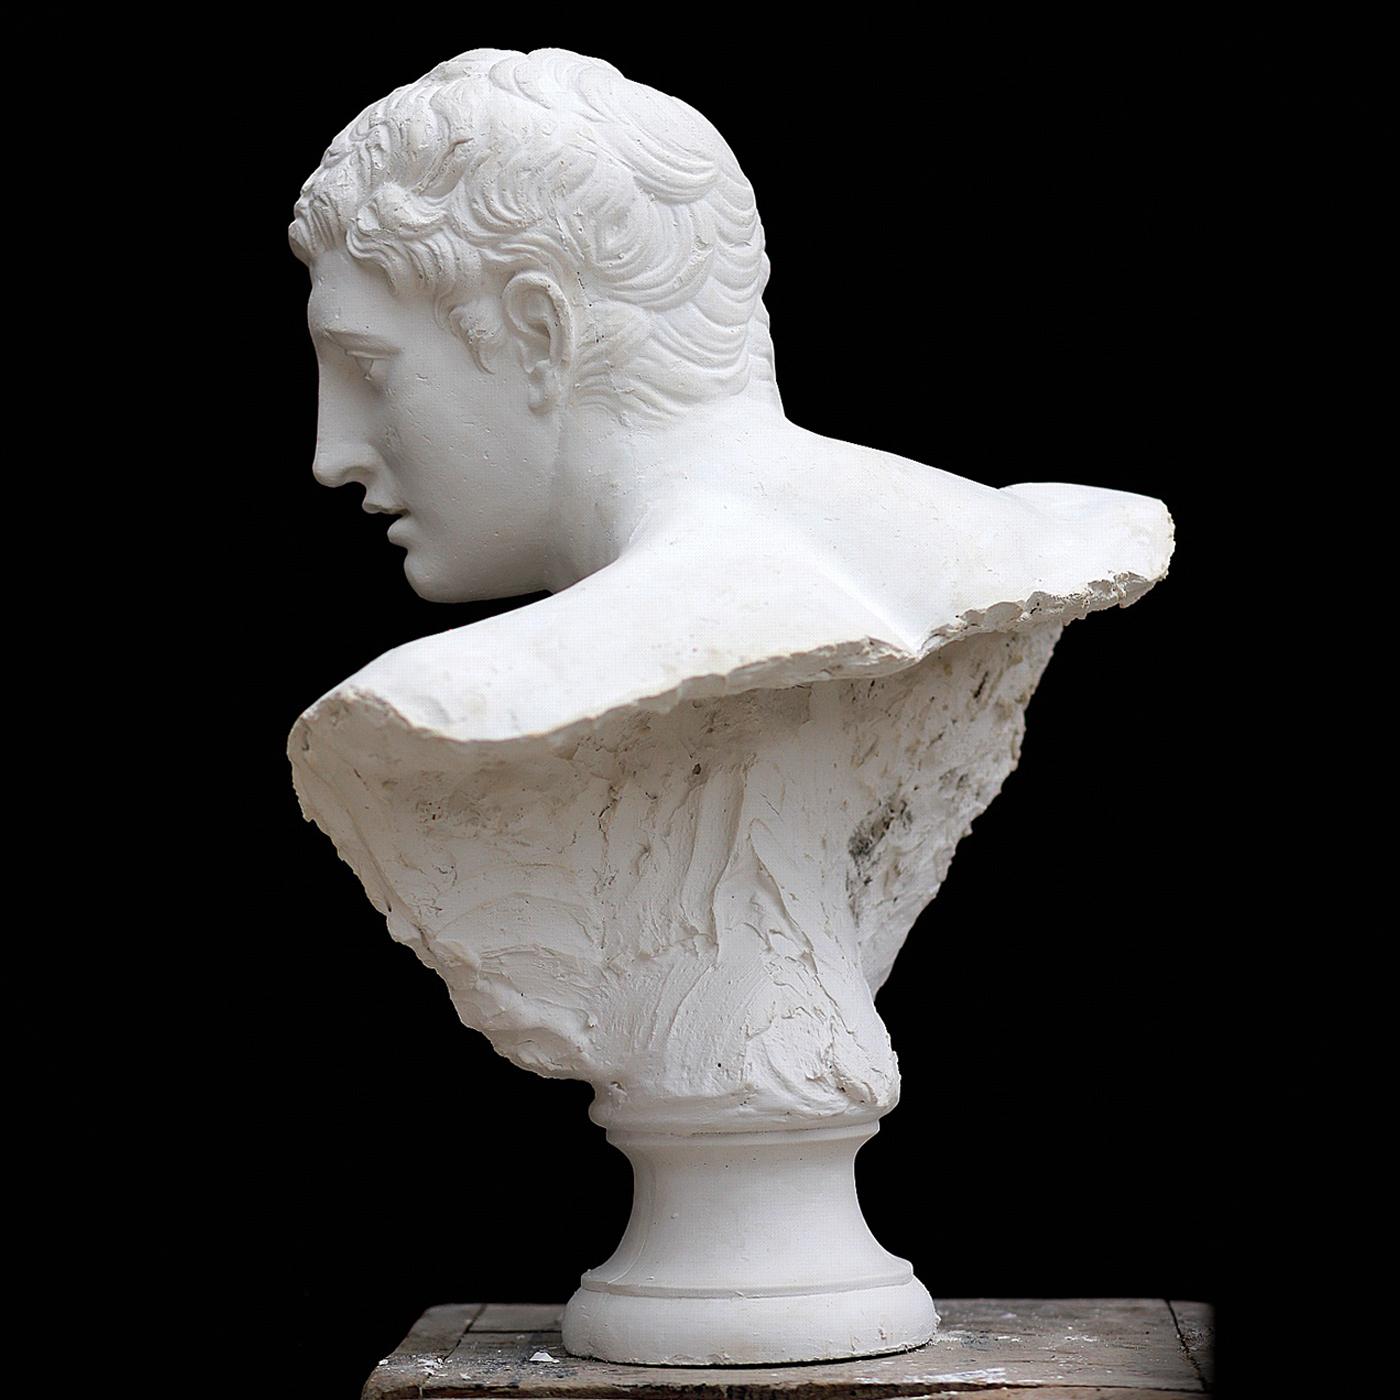 This exquisite bust is an exact depiction of the face of the Discobolus, the famous Greek sculpture whose celebrated Roman copies are housed in the National British Museum and the Museo Nazionale Romano. Hand-sculpted by the artists at the Studio